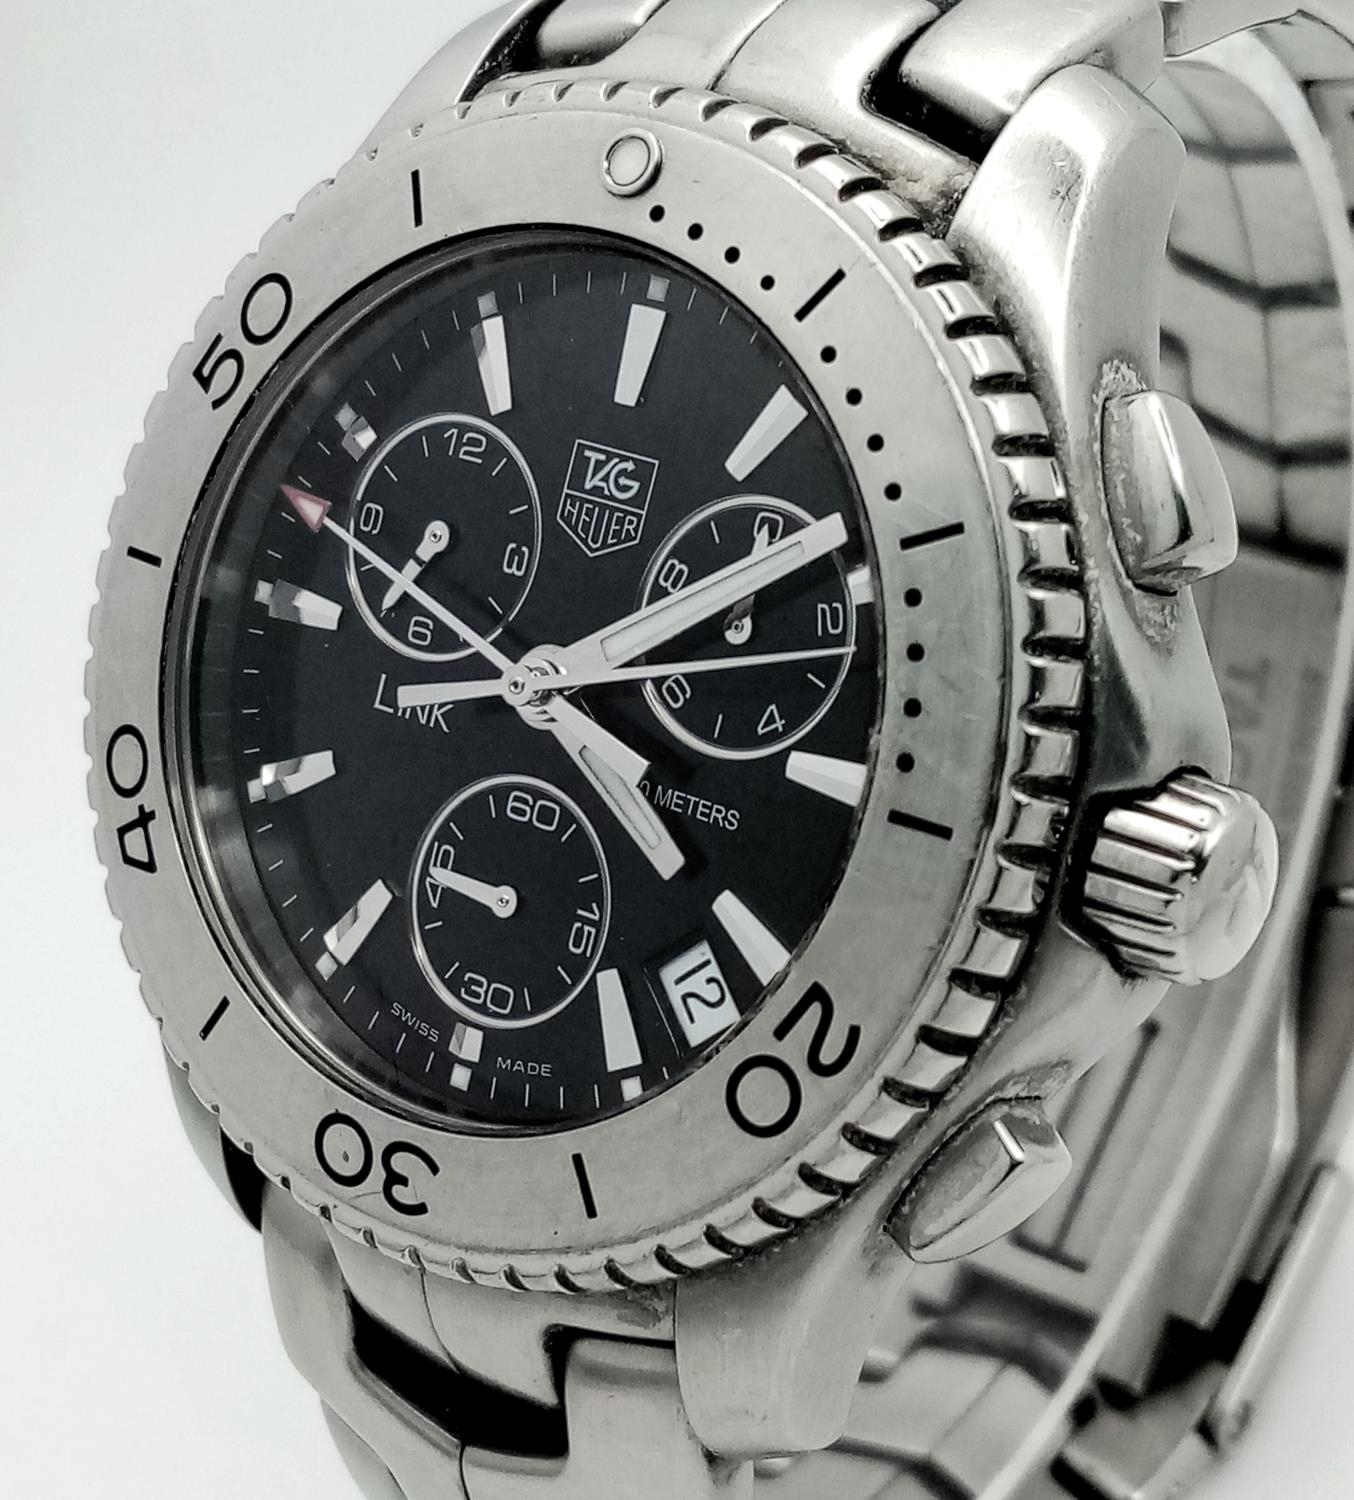 A Tag Heuer Link Quartz Chronograph Gents Watch. Stainless steel bracelet and case - 42mm. Black - Image 2 of 8